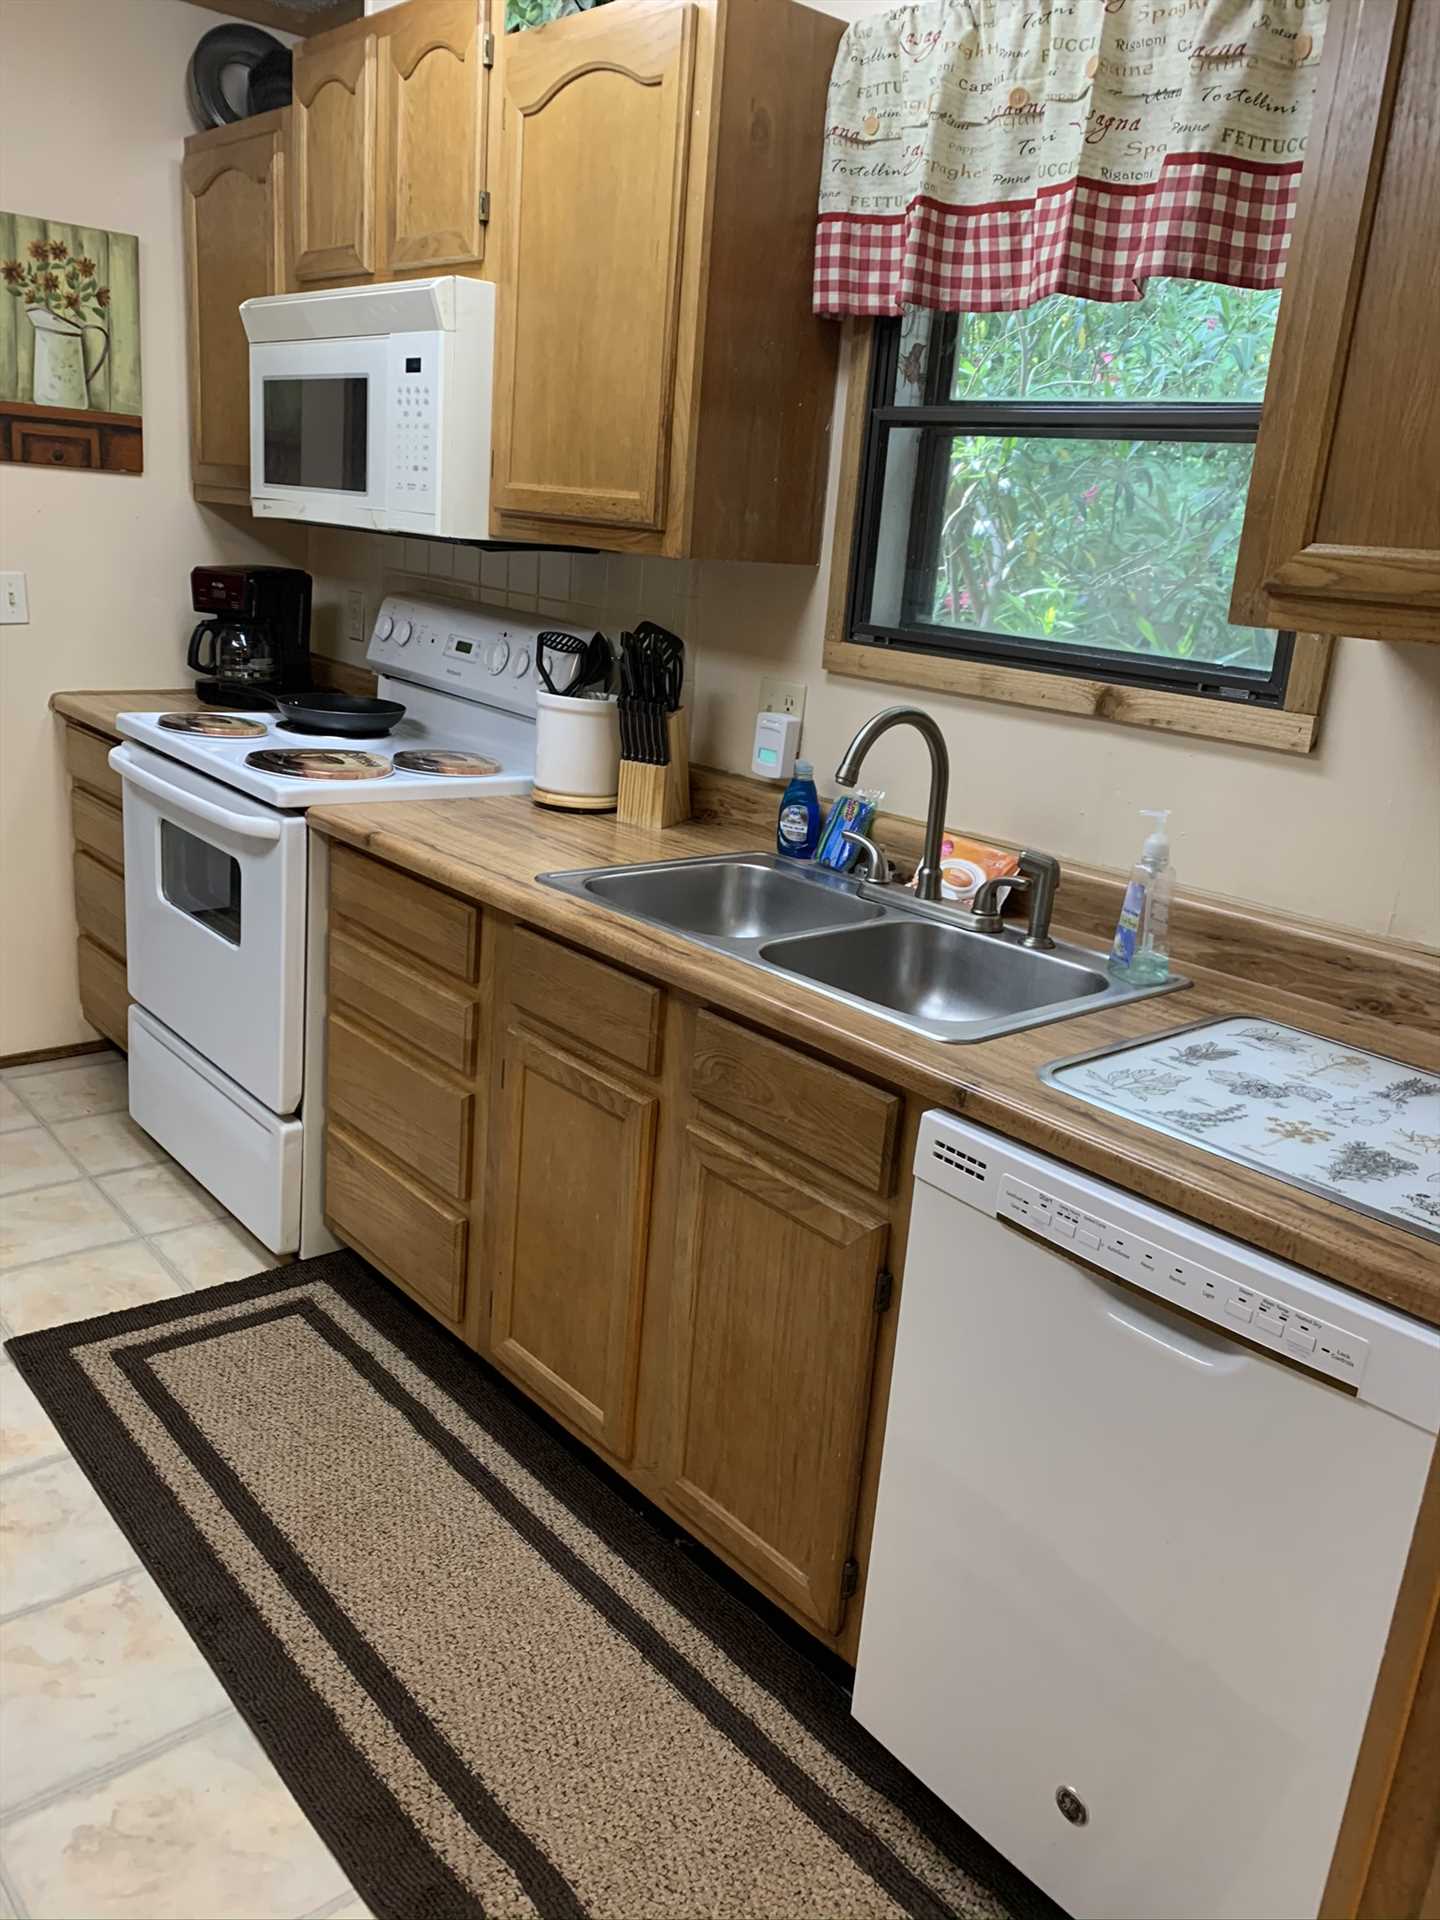                                                 The kitchen at the Lodge is decked out with everything your resident chefs will need, and all will be served in comfort at the dining and gaming tables nearby.